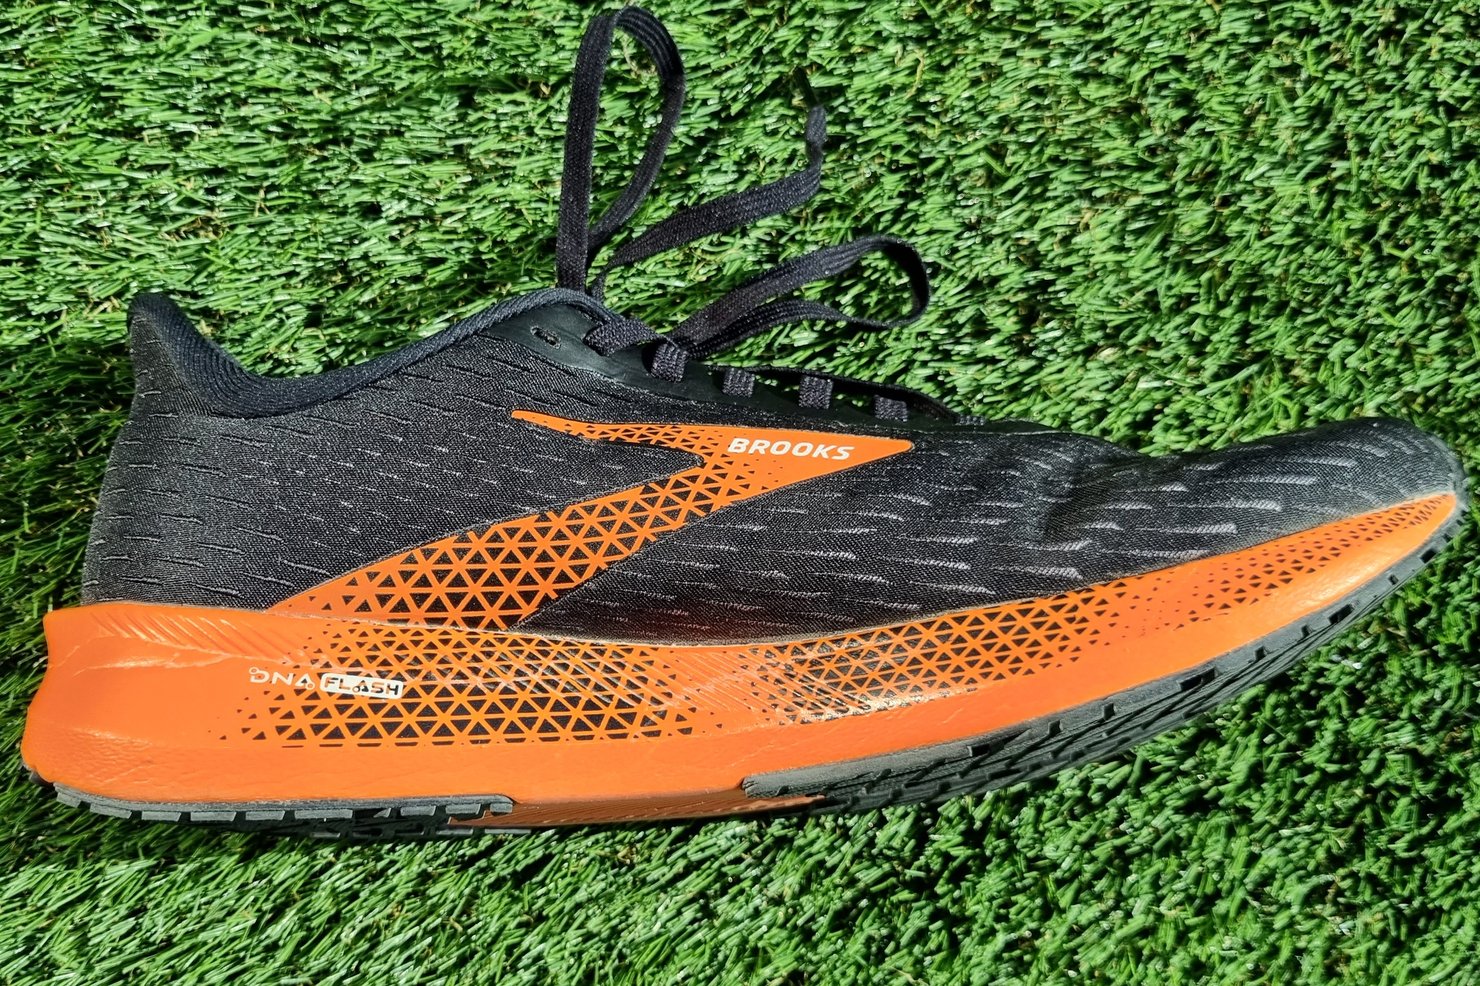 The Brooks Hyperion Tempo on the grass.